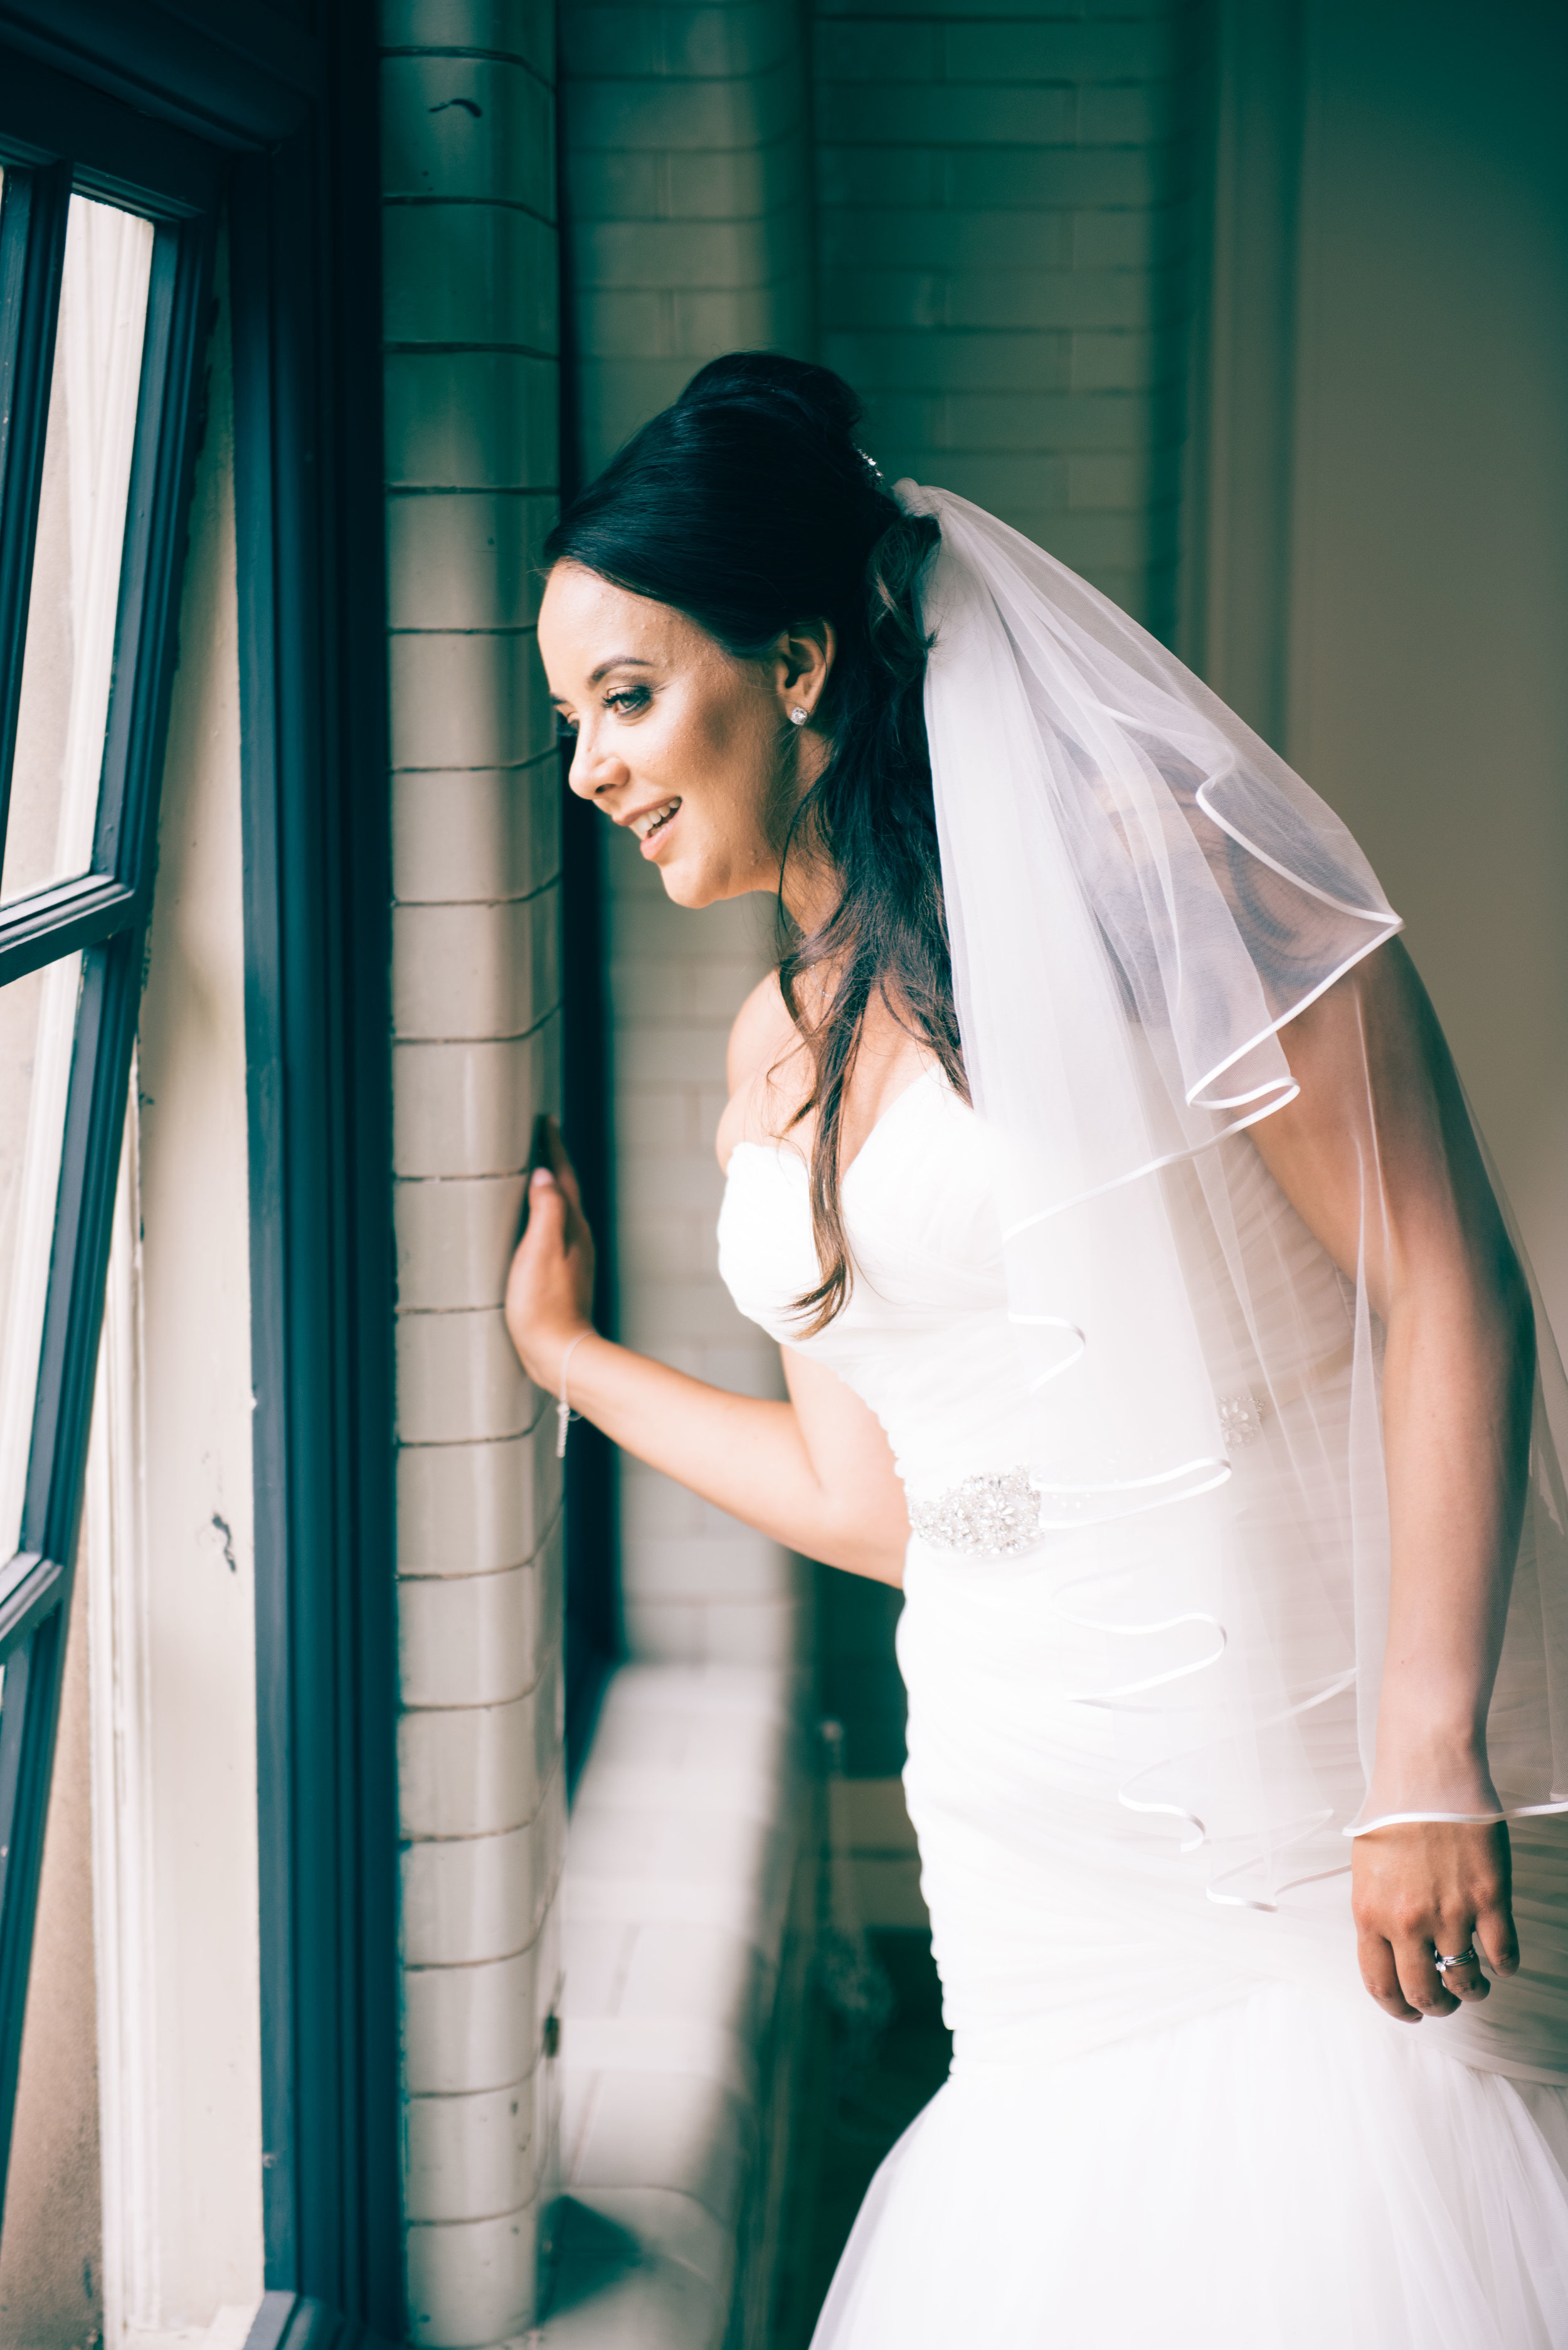 The Pumping House. Ollerton. Natural light on the Bride. Coales Capture Wedding Photography 